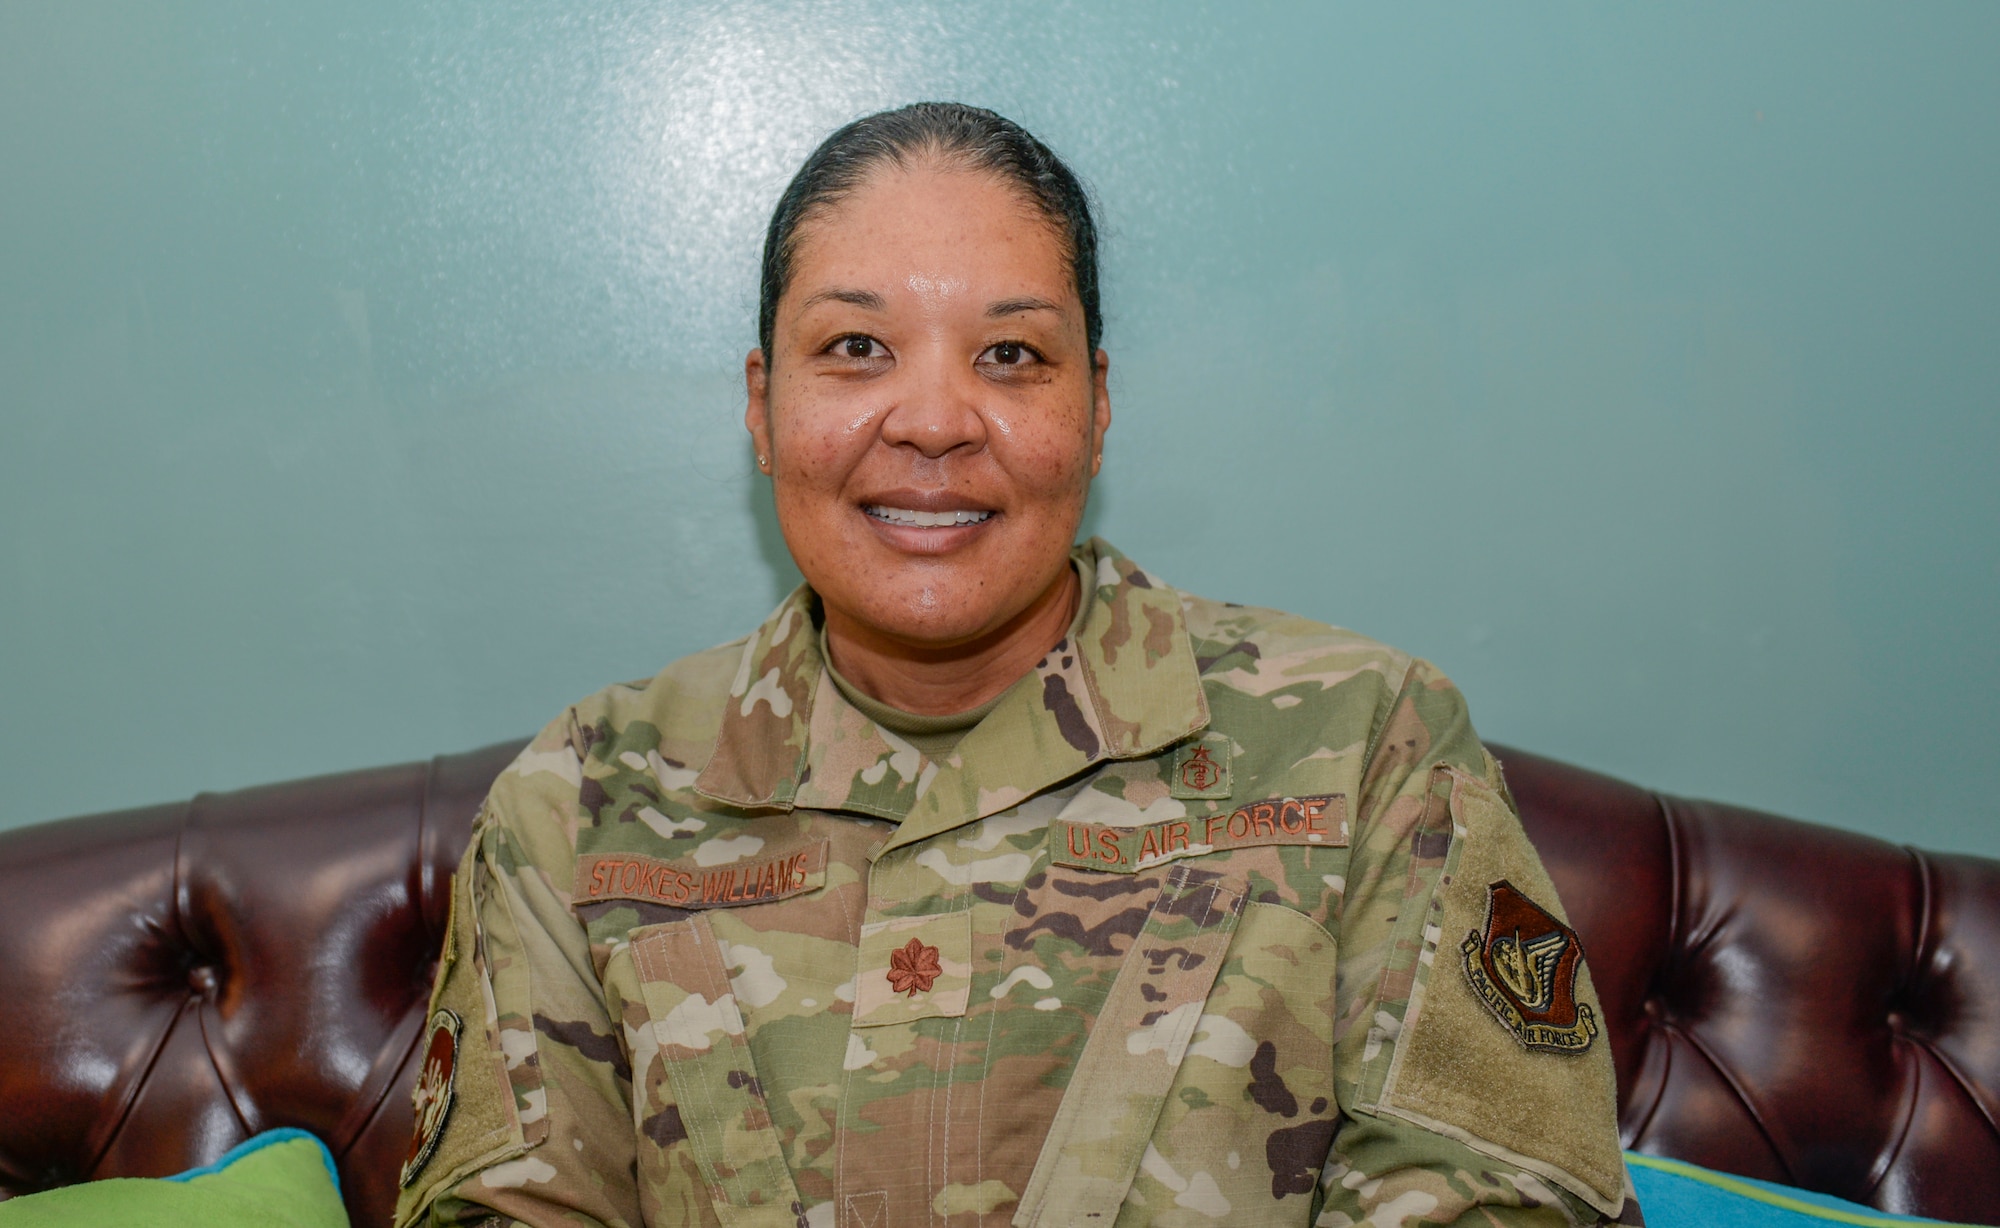 "This year during Biomedical Science Corps week, as I reflect on my career as a social worker, I think about this quote from Martin Luther King 'Life’s most urgent question is: What are you doing for others?', said U.S. Air Force Maj. Charu Stokes-Willams, the mental health flight commander assigned to the 36th Medical Group at Andersen Air Force Base, Guam. "It has been one of the most amazing journeys. I love what I do and serving in the military in this role has been one of the best decisions of my life." The BSC is the frontline of Air Force Medical Services readiness, bringing global health engagement while enhancing world-wide medical response. As a diverse corps, the BSC comprises 17 different medical specialties, and each section plays a role in making medical squadrons effective at military bases all around the world. (U.S. Air Force Photo by Senior Airman Helena Owens)